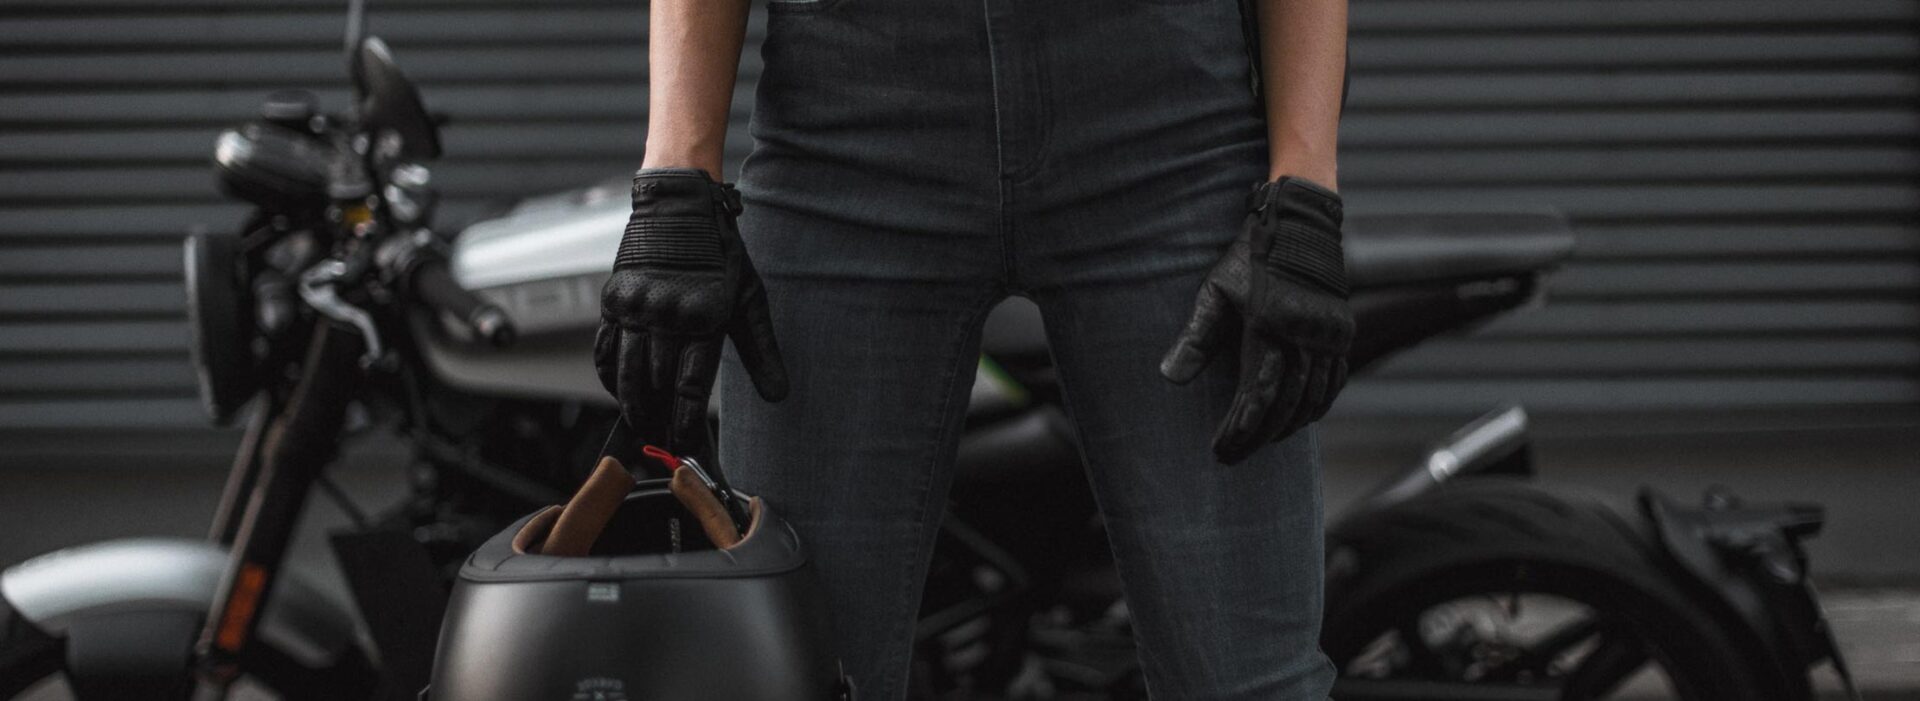 Armored motorcycle pants for women